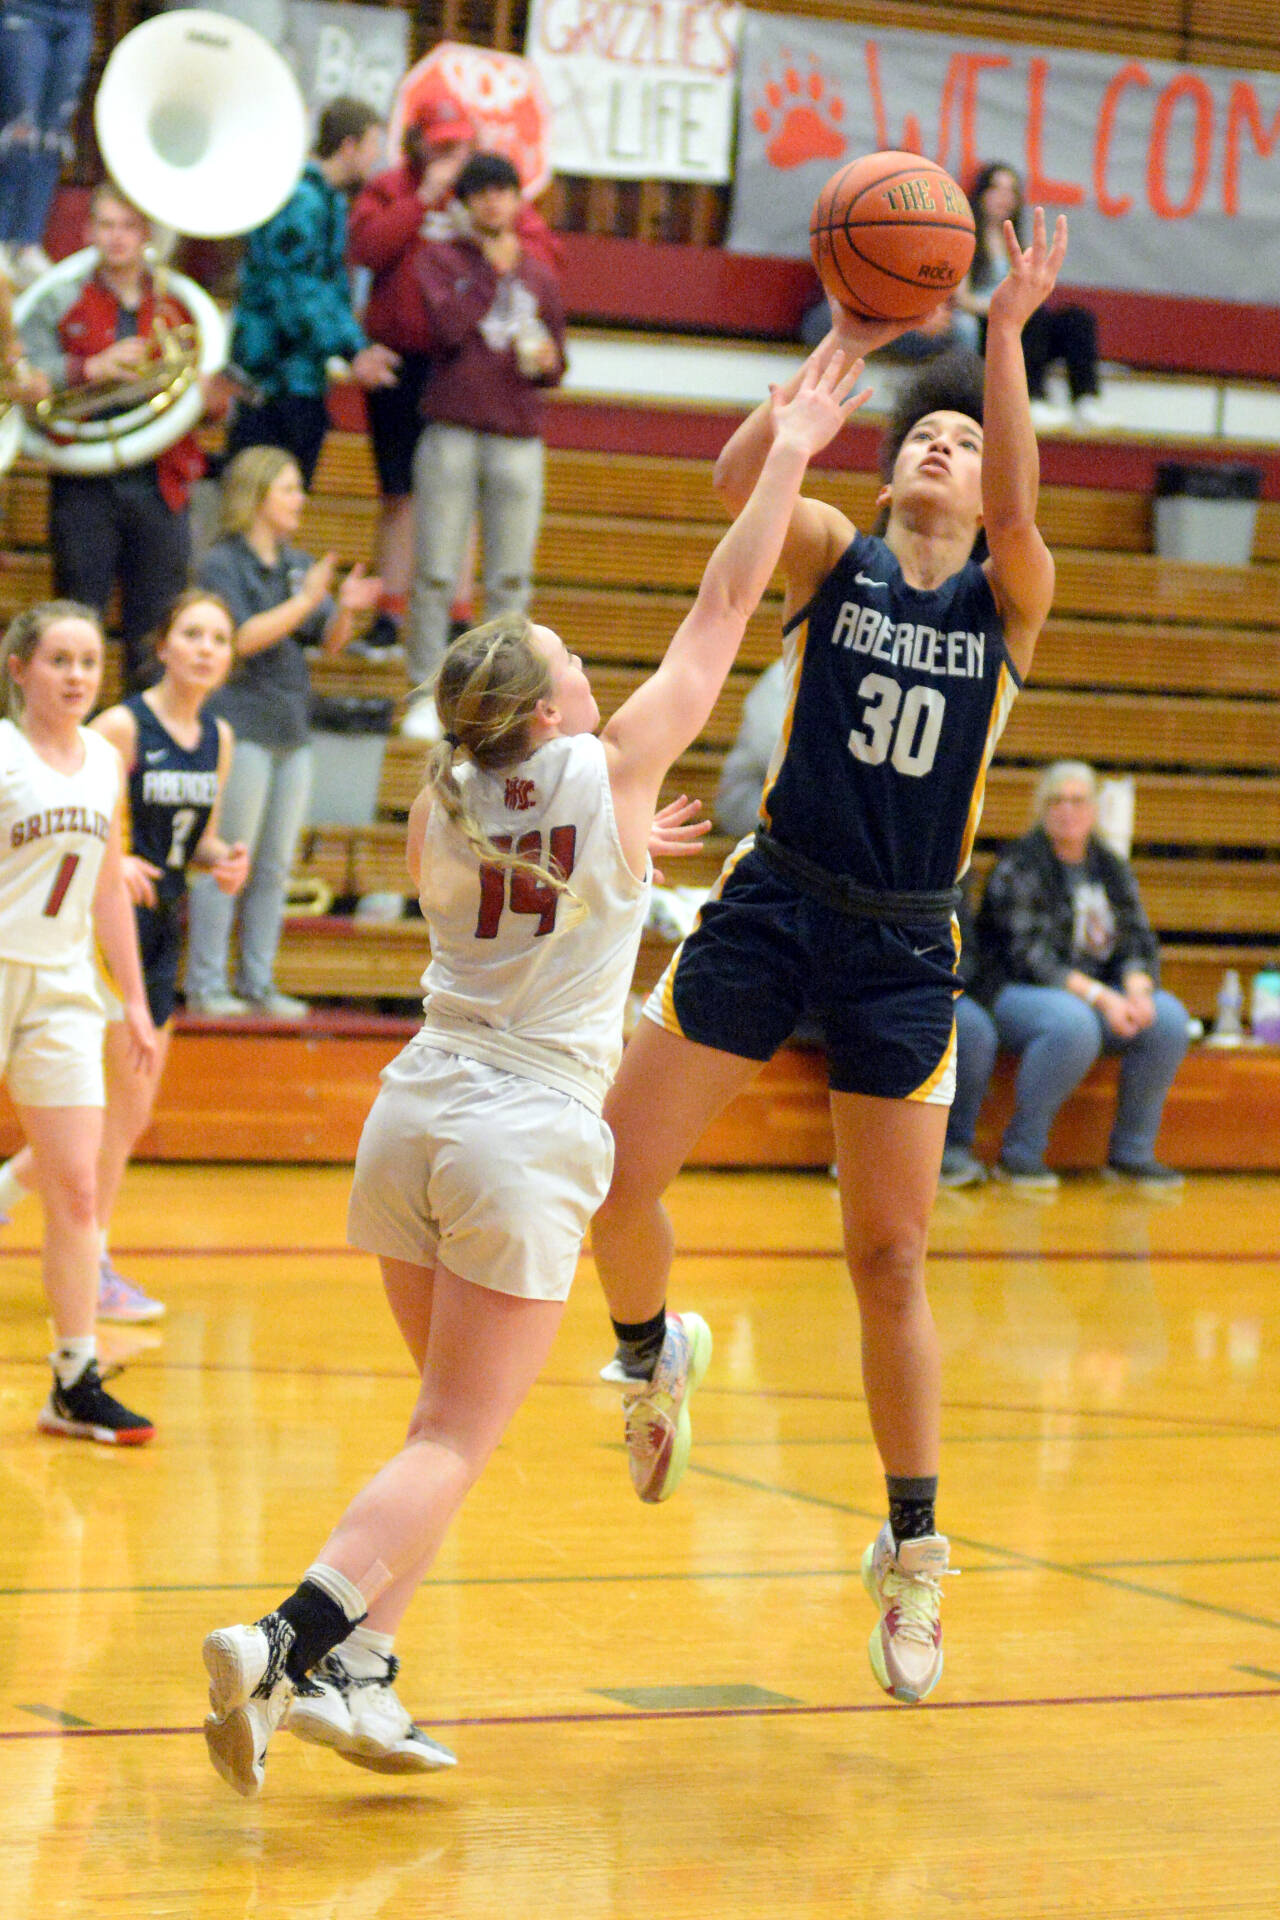 RYAN SPARKS | THE DAILY WORLD Aberdeen guard Maddie Gore (30) pulls up for a jump shot while defended by Hoquiam’s Ella Folkers (14) during the Bobcats’ 52-44 win on Thursday in Hoquiam.